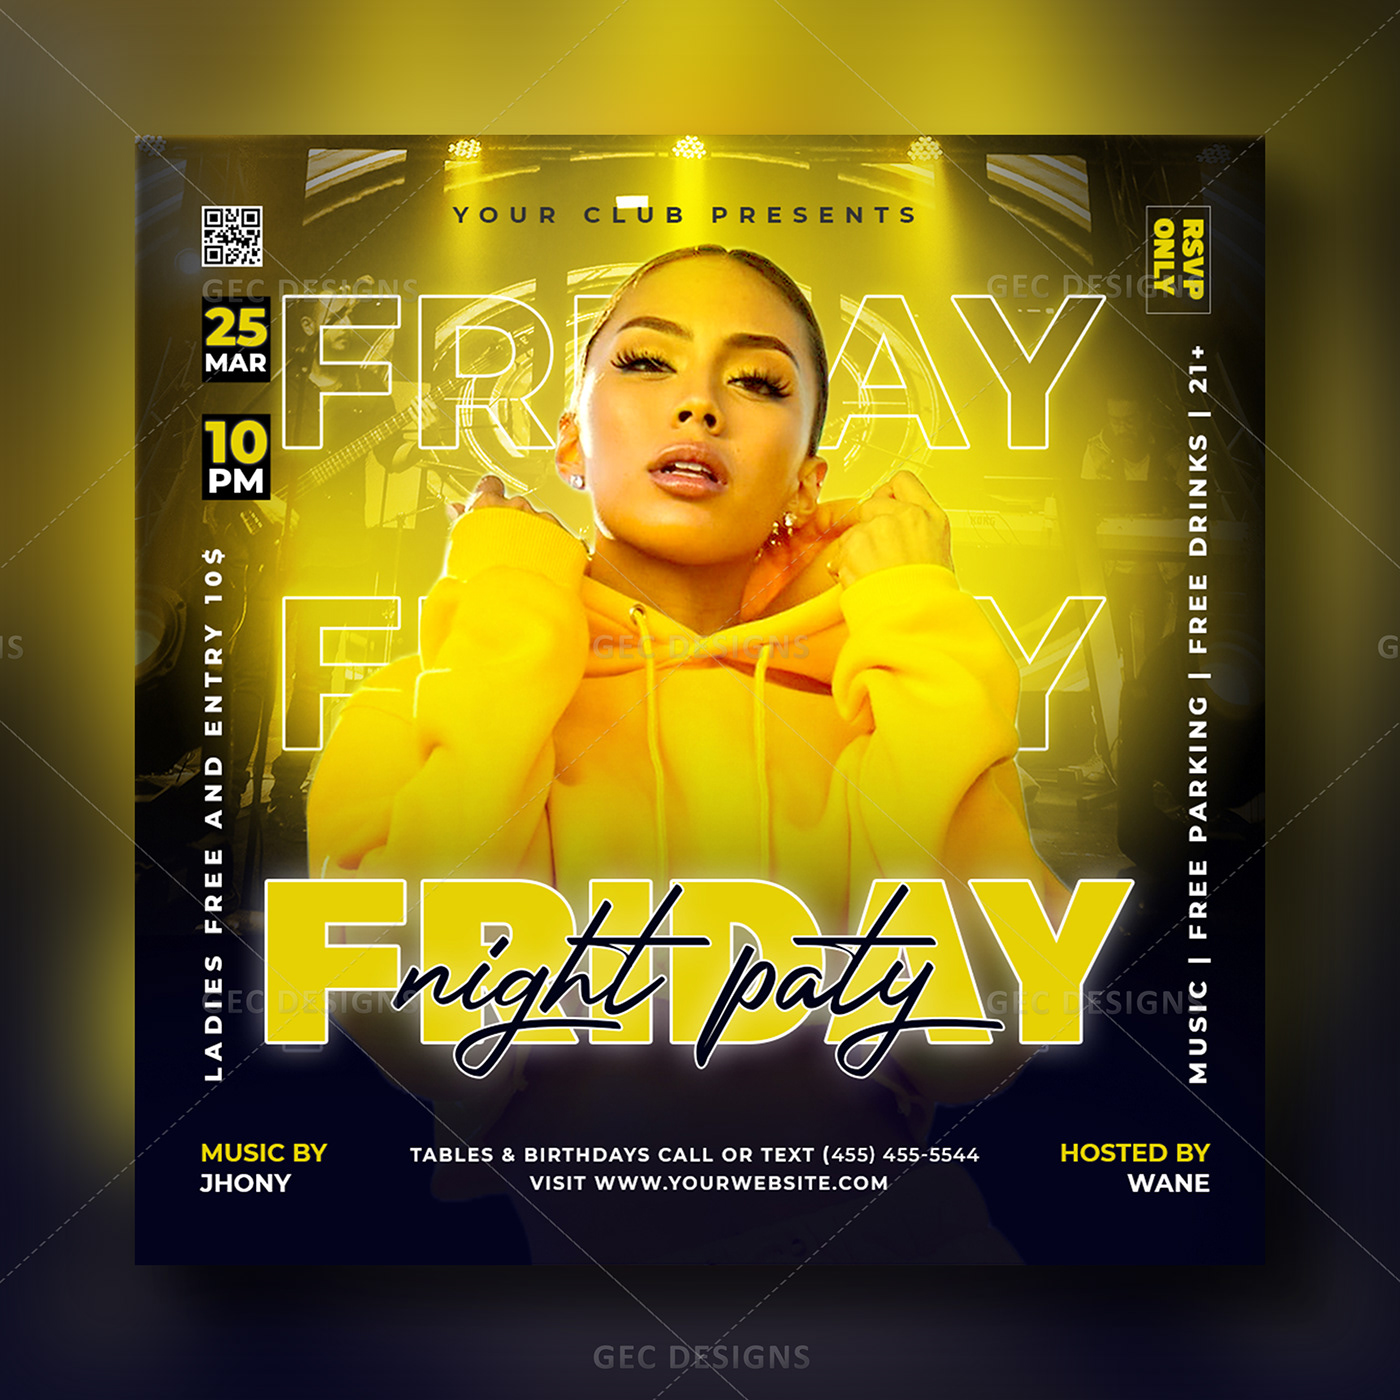 Night party flyer template is a trendy and captivating design that is perfect for promoting a party.